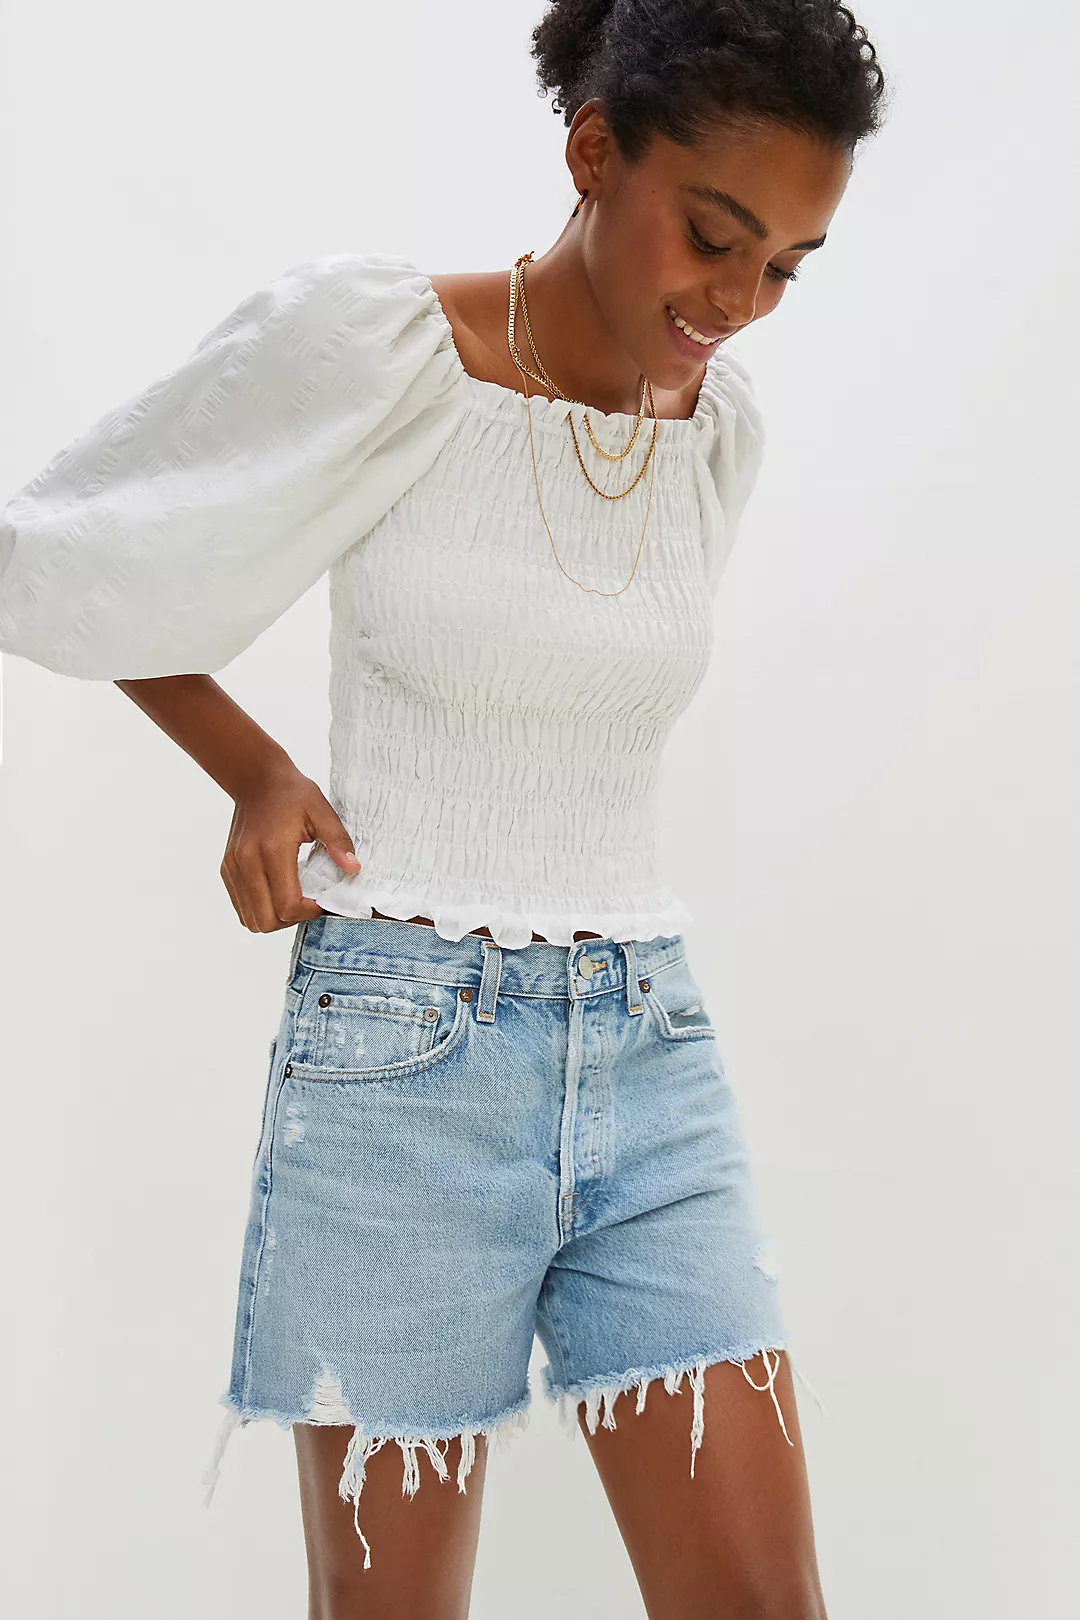 Sustainable Denim Staples Under $150 to Wear This Summer and Beyond ...